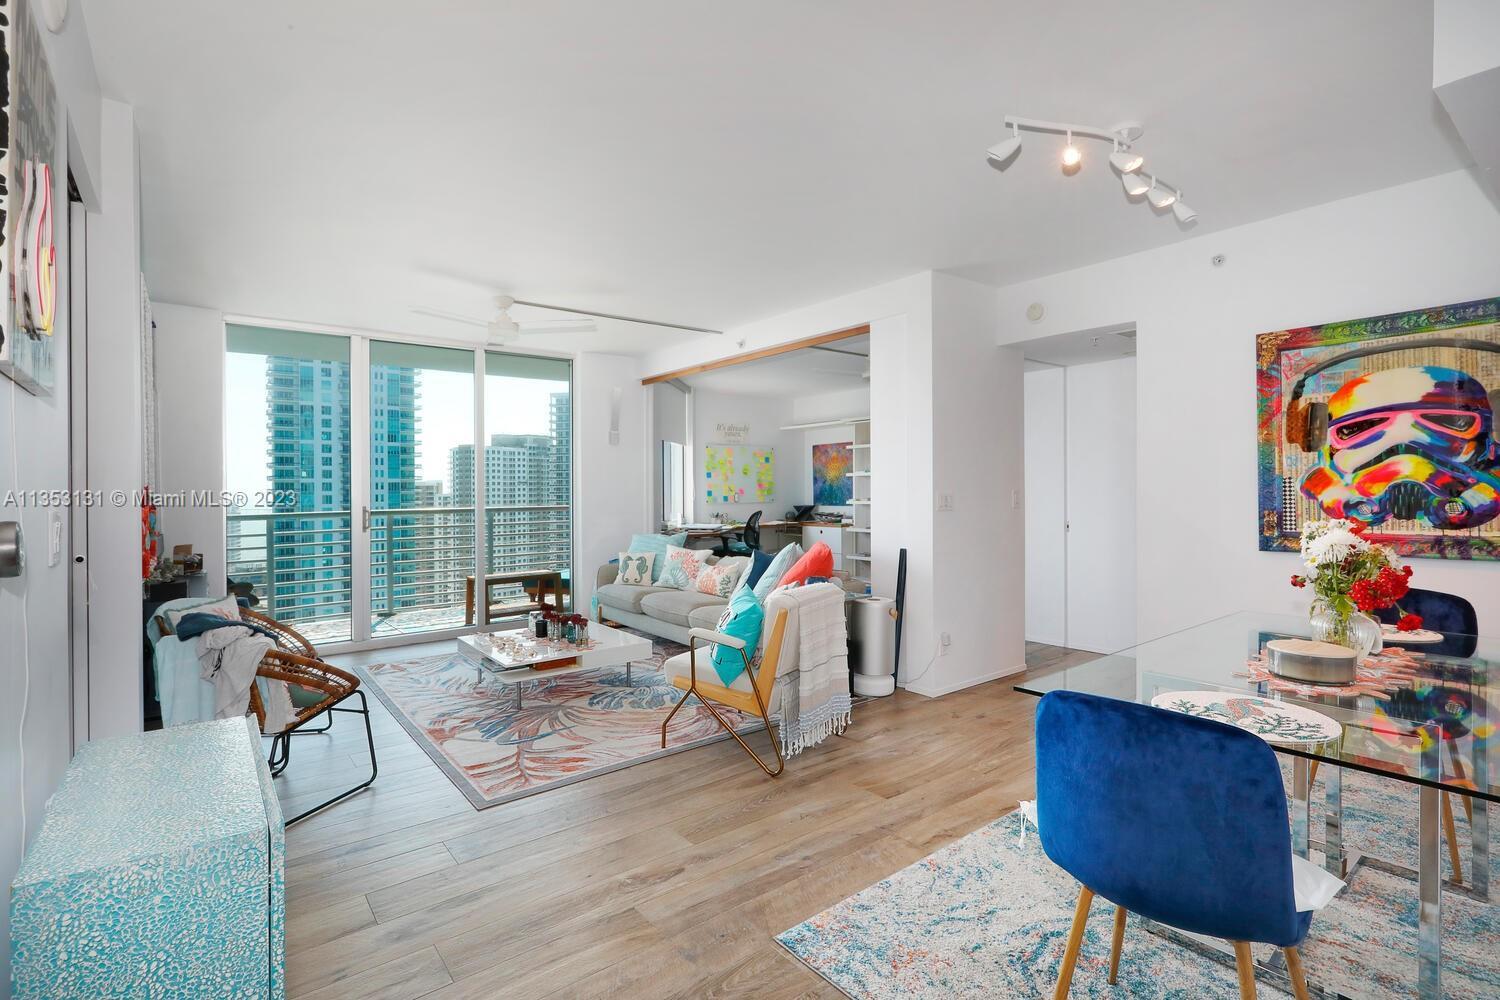 Enjoy sensational 180-degree views of Biscayne Bay & the Miami River from this 28th flr. residence i